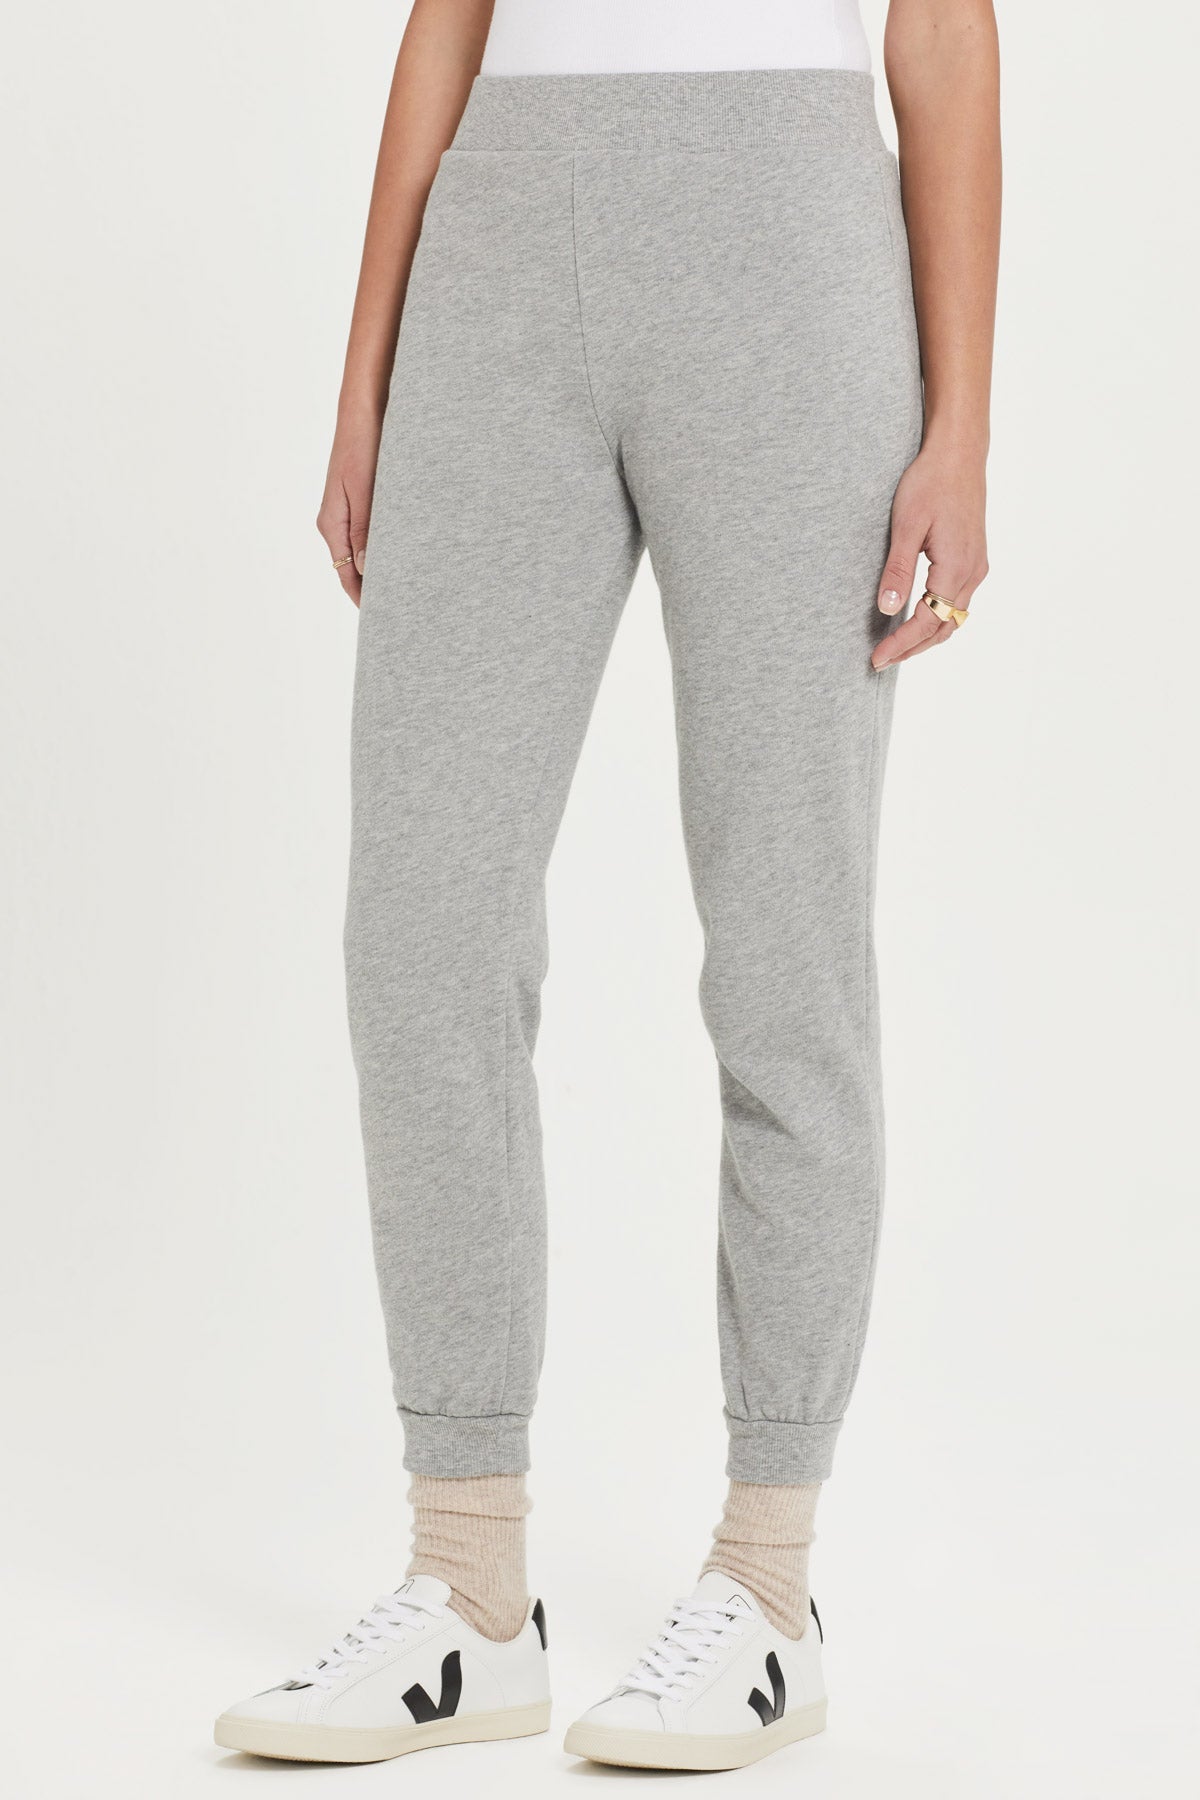 French Terry High Rise Cuff Sweatpant - Goldie 